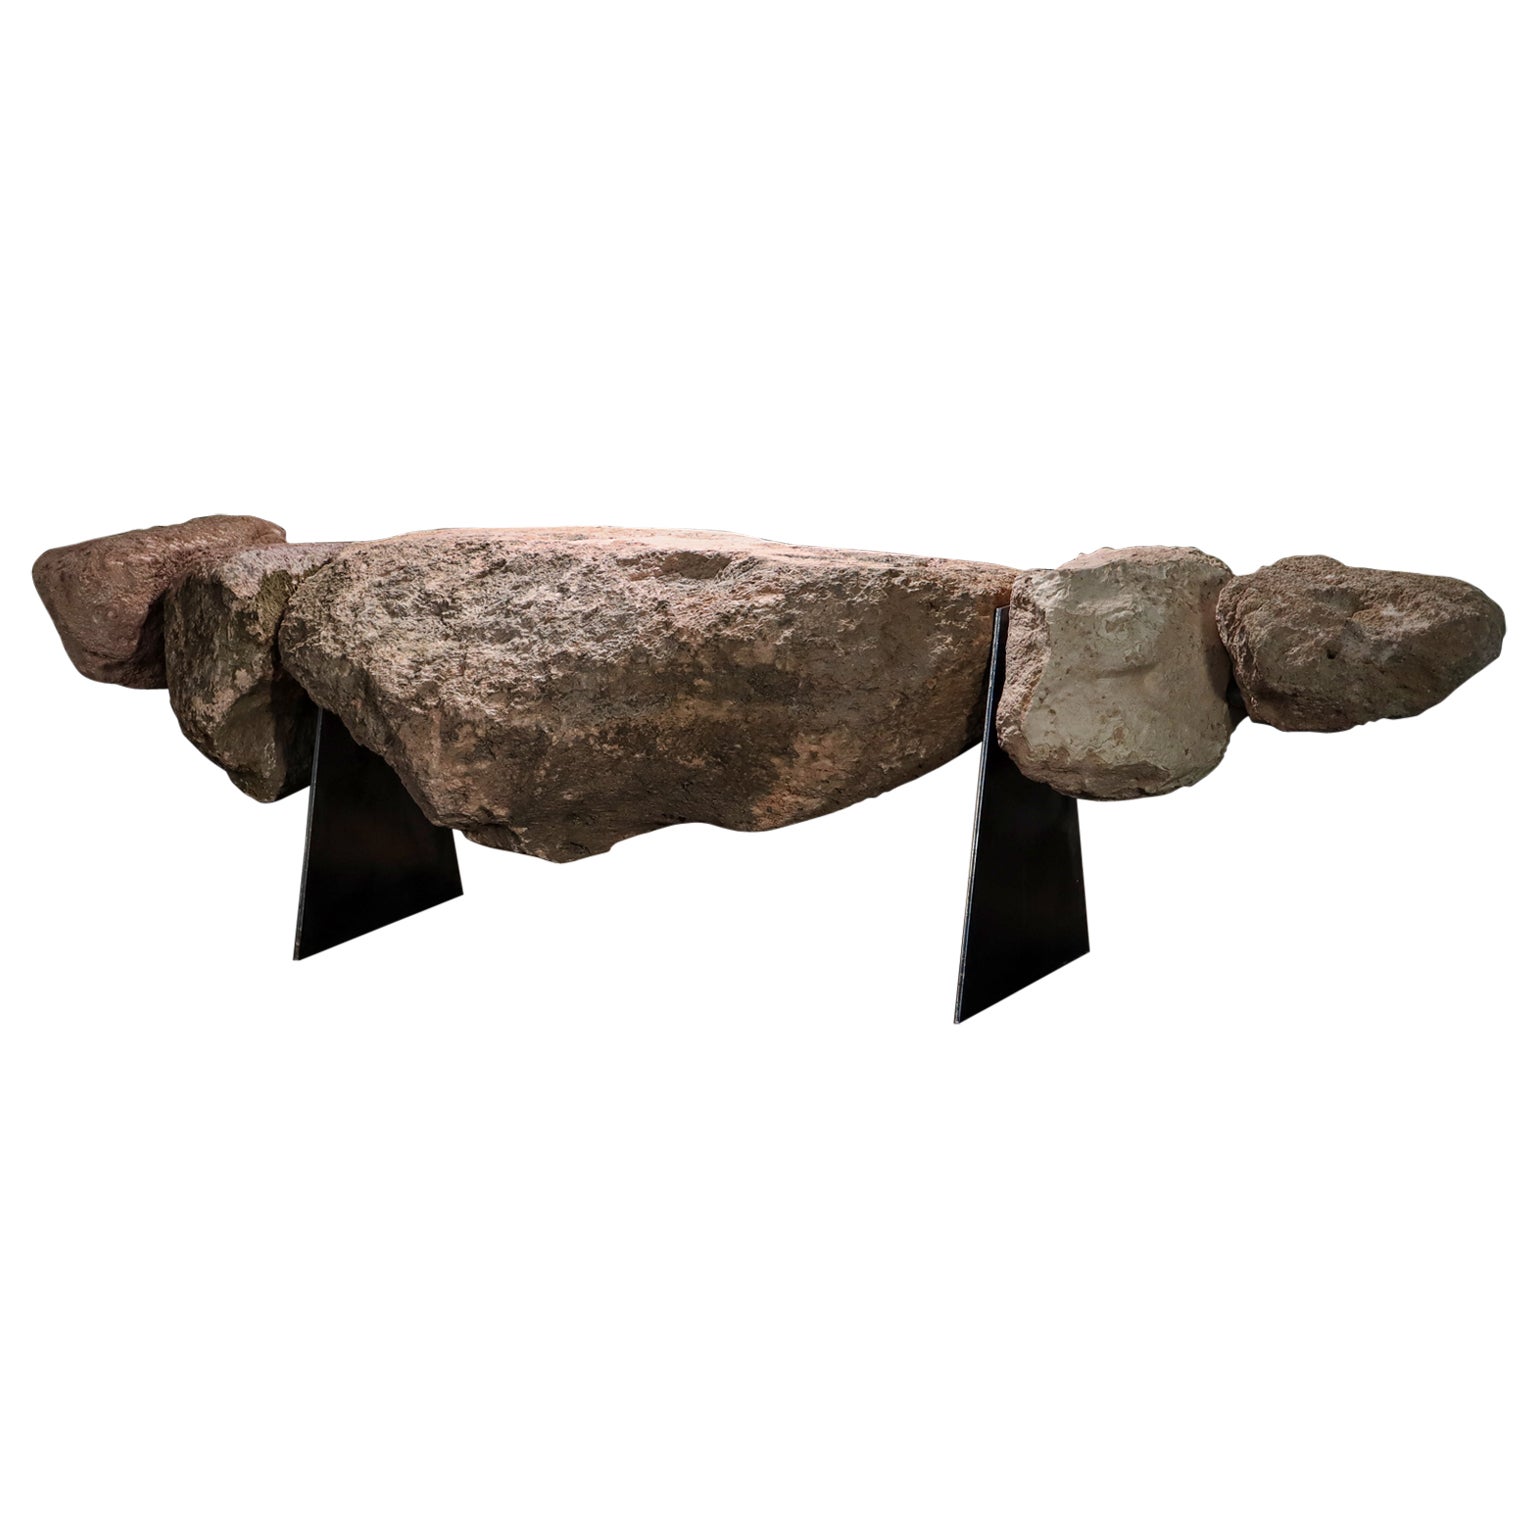 Sculptural Stone and Iron Functional Art Bench by William Stuart for Costantini